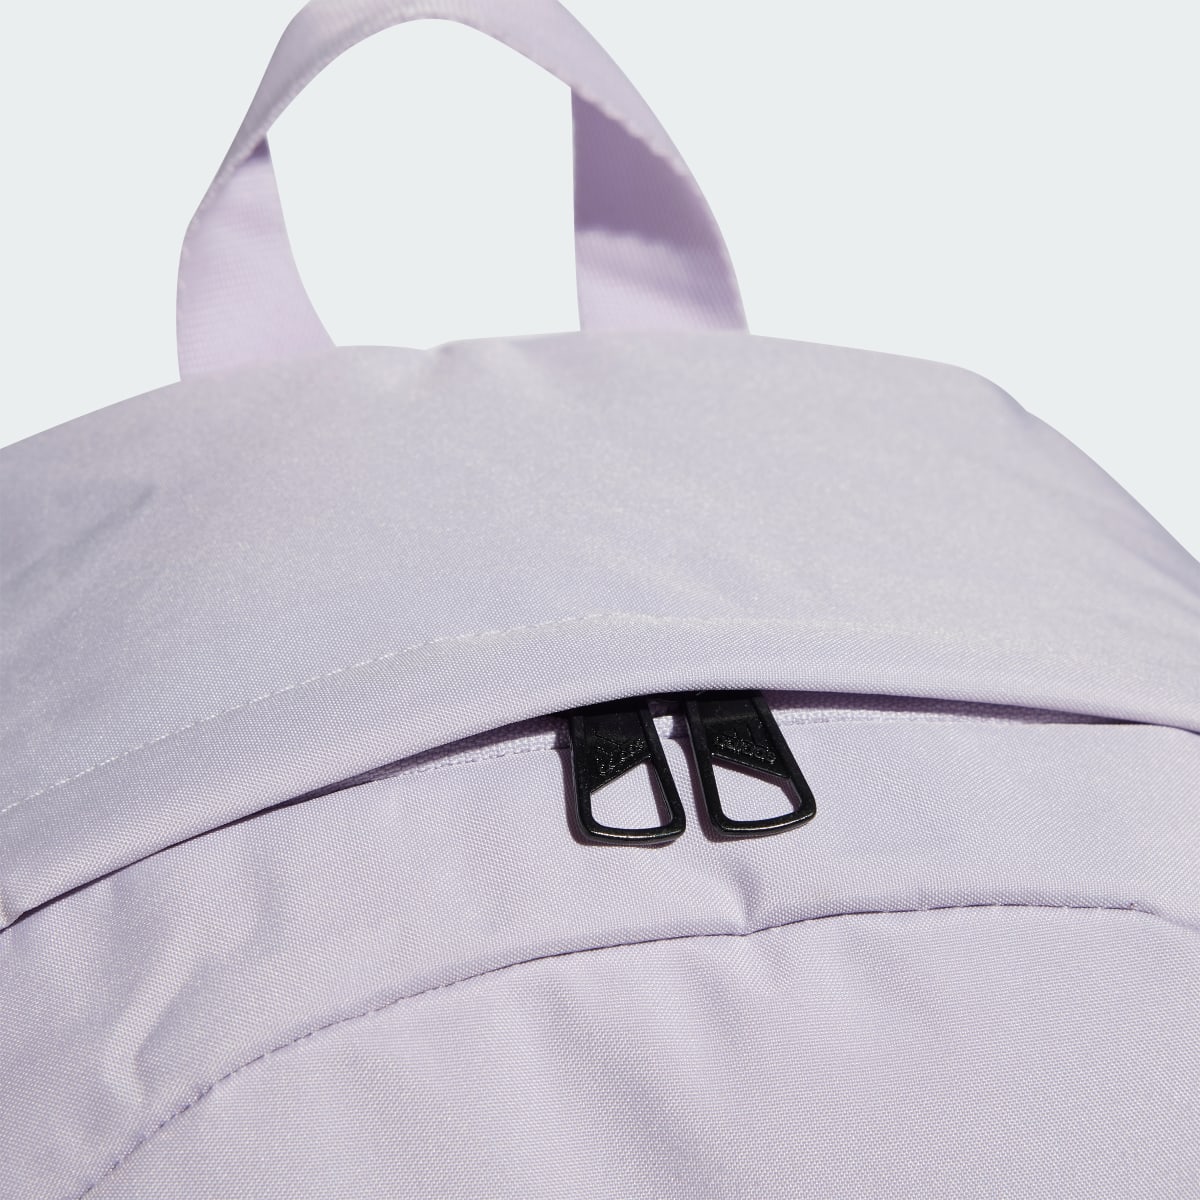 Adidas Linear Essentials Backpack. 6